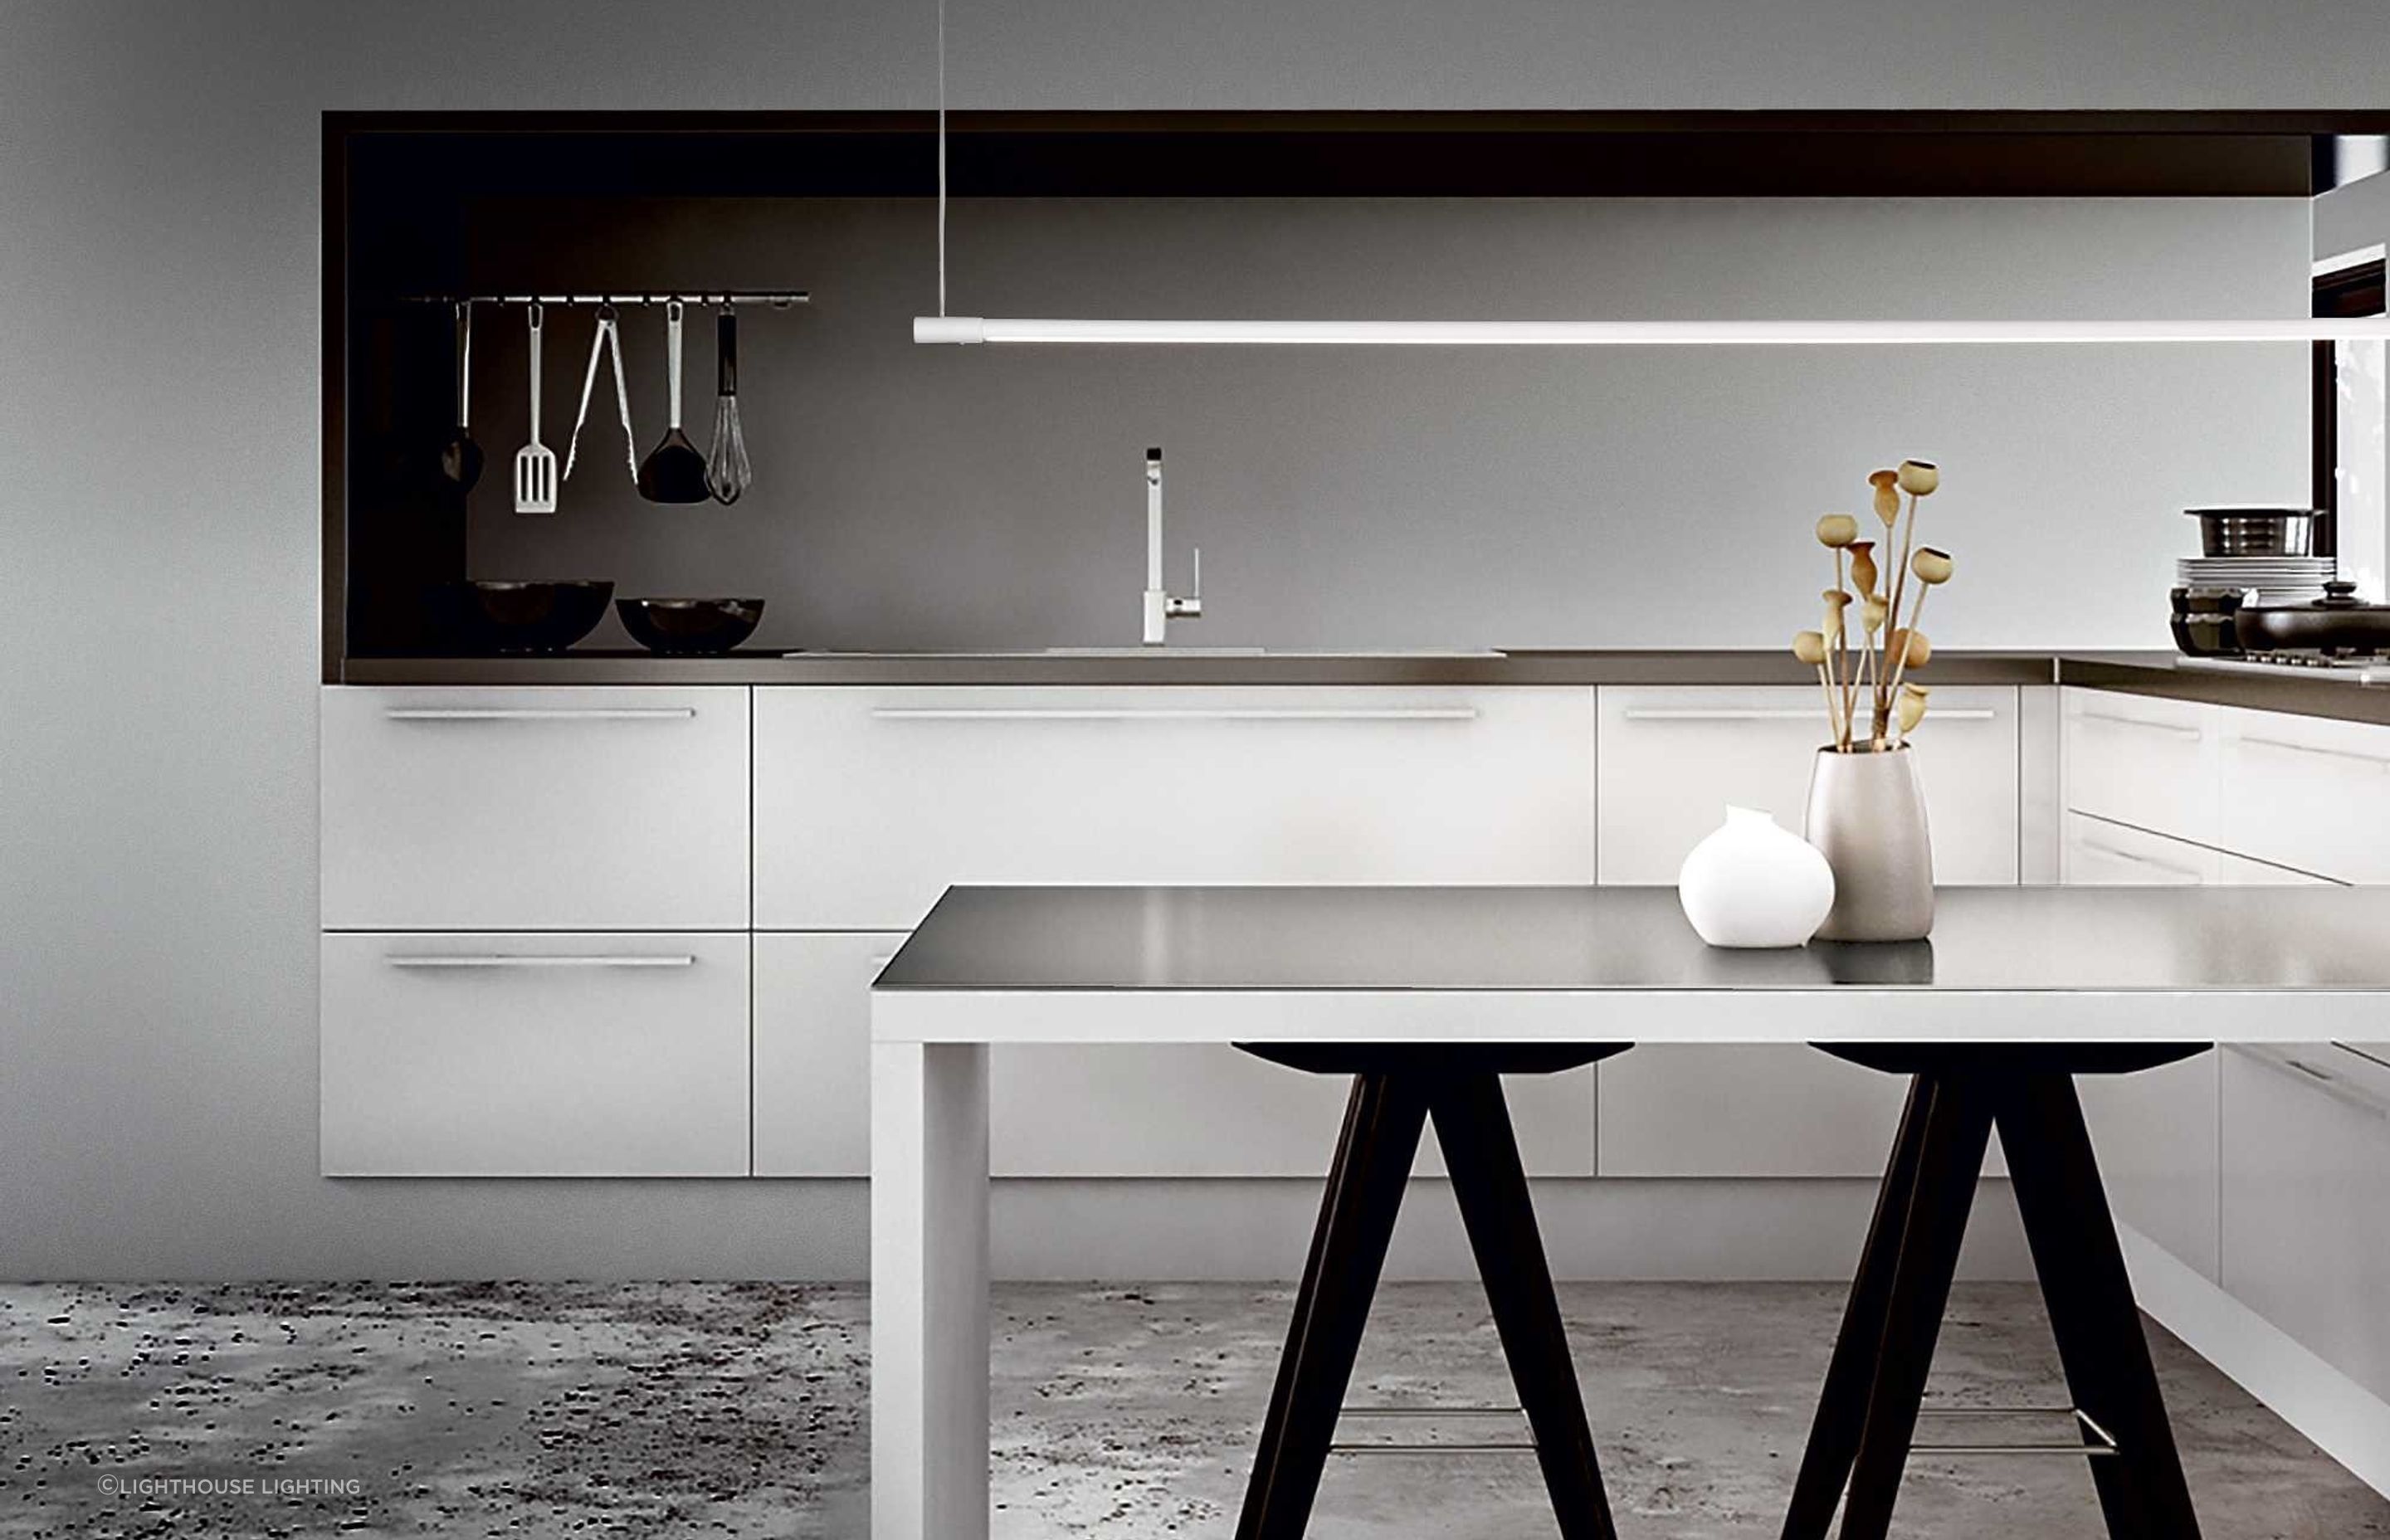 With a great lifespan, linear lights like the Yoko Light Pendant offer a great return on investment.